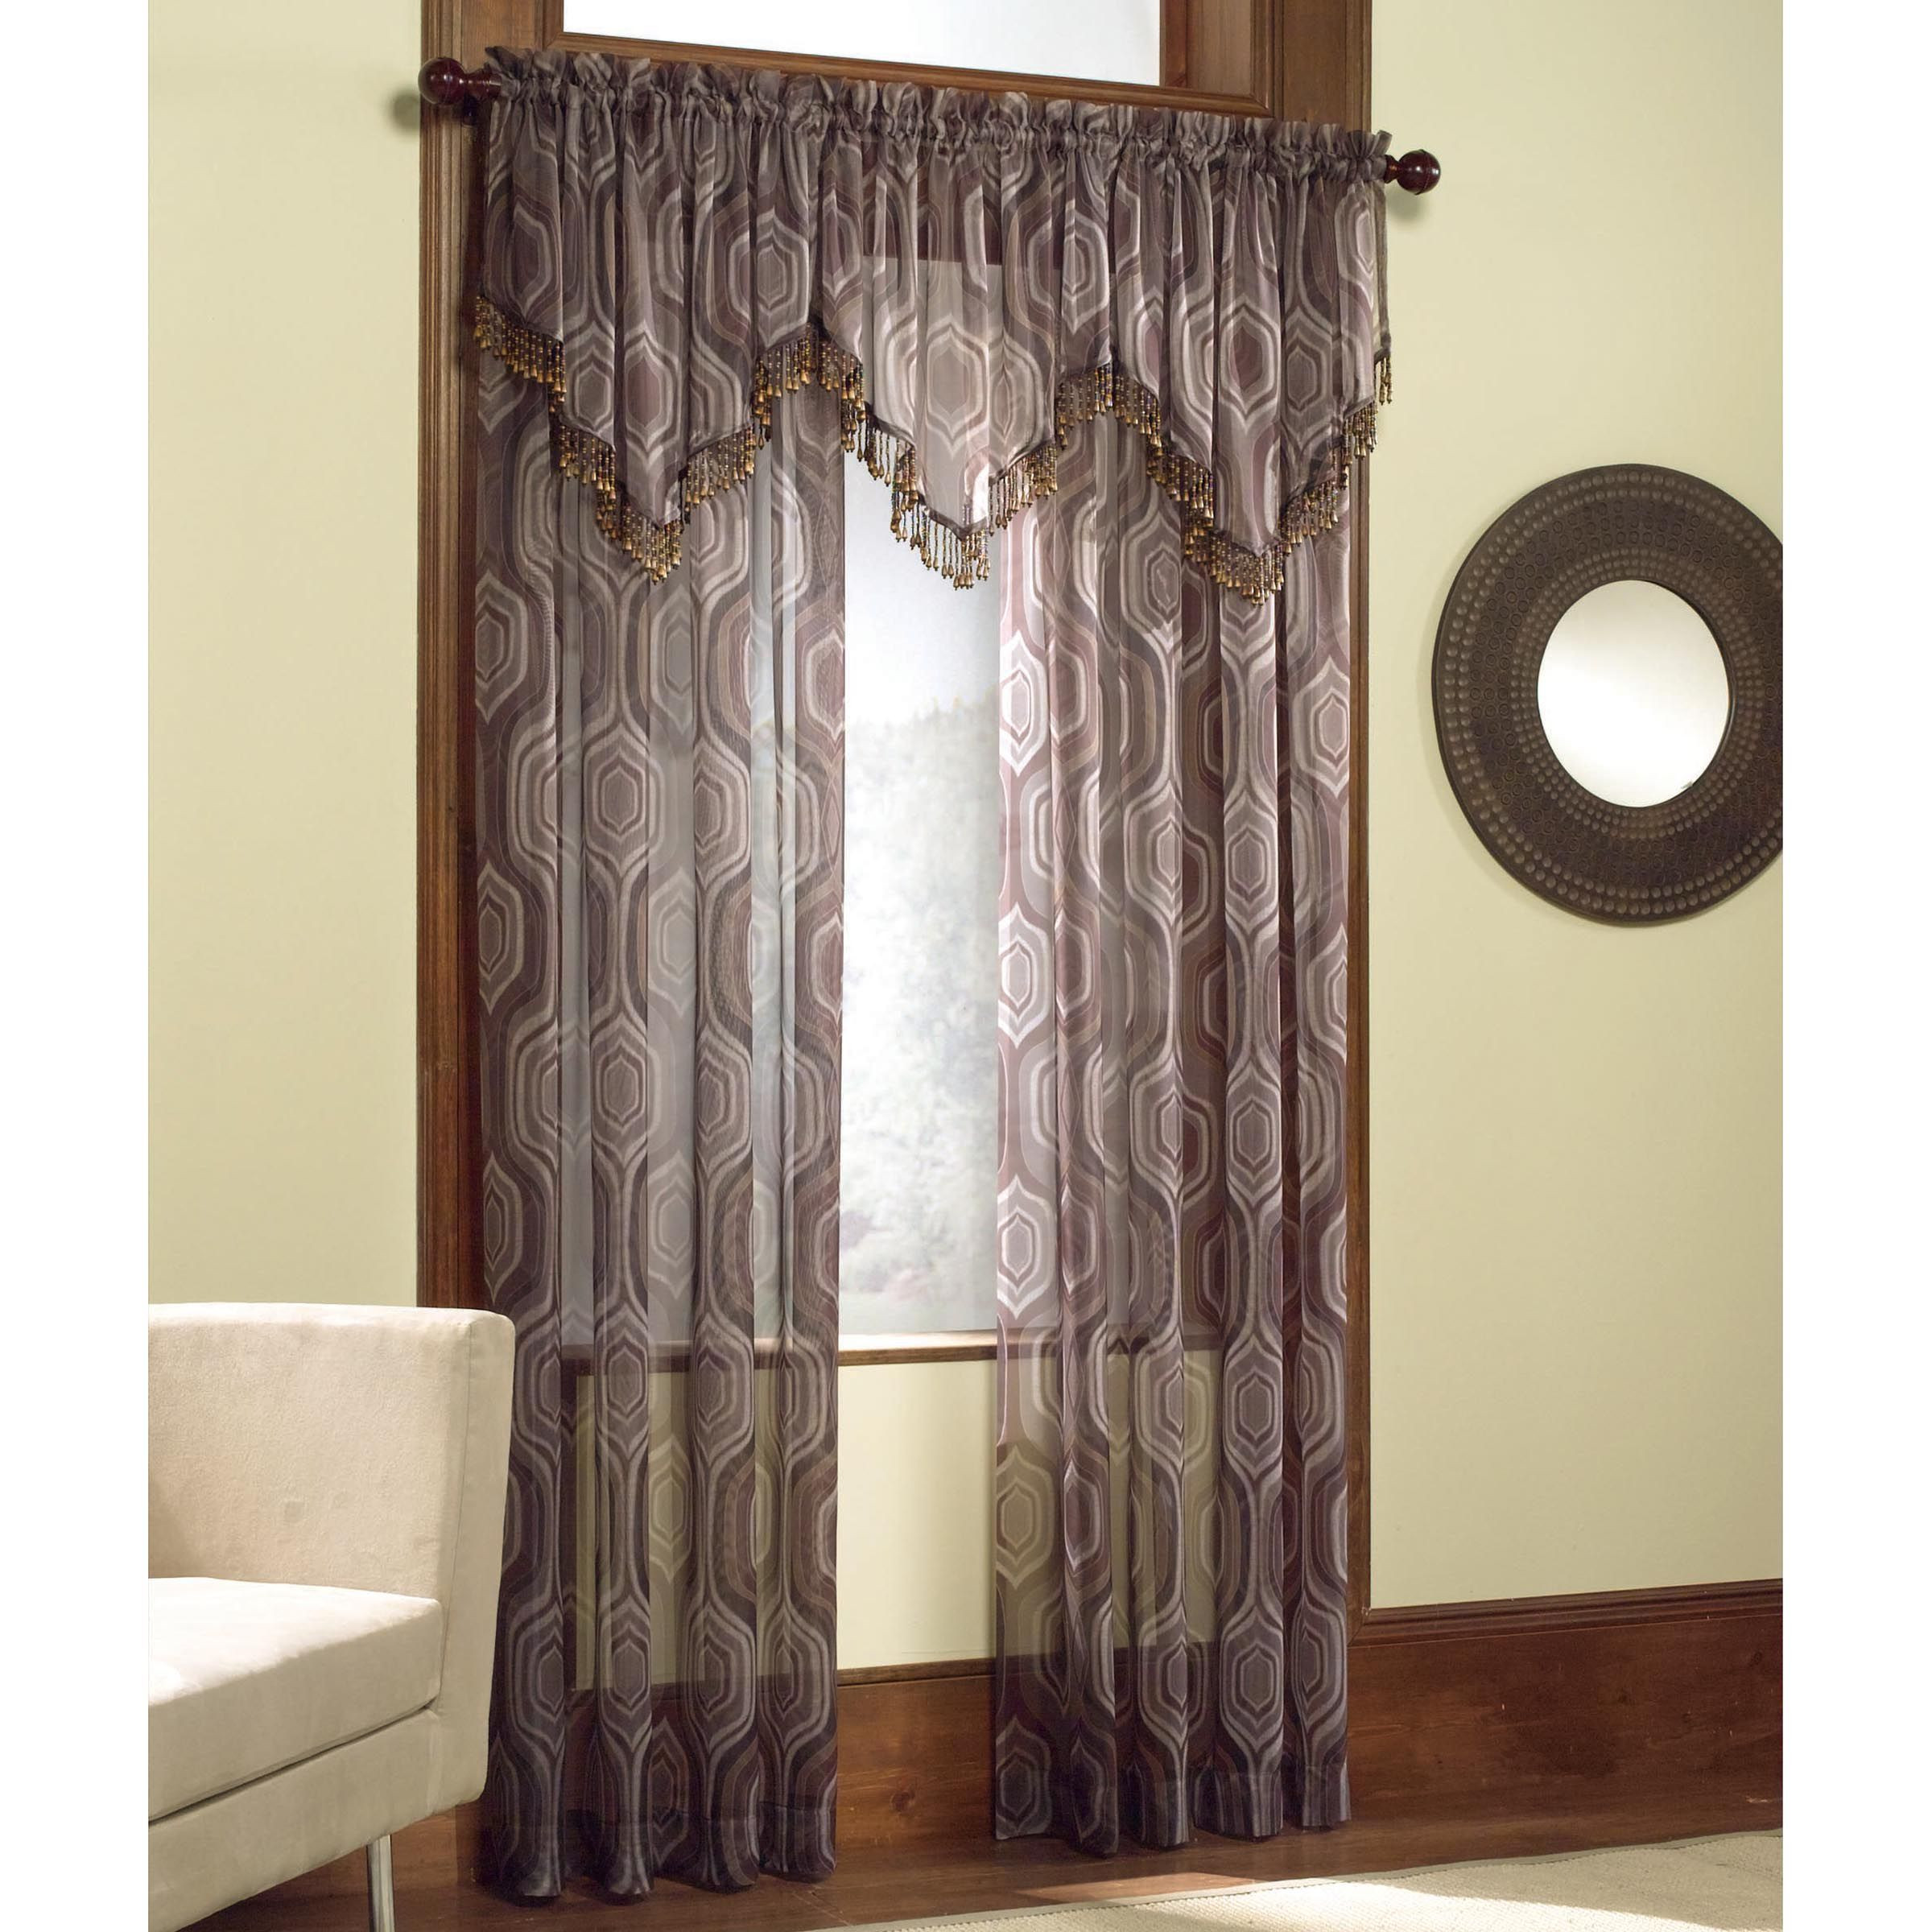 Sears Curtains For Living Room
 Window Panel with Rod Pocket Embellish Your Windows at